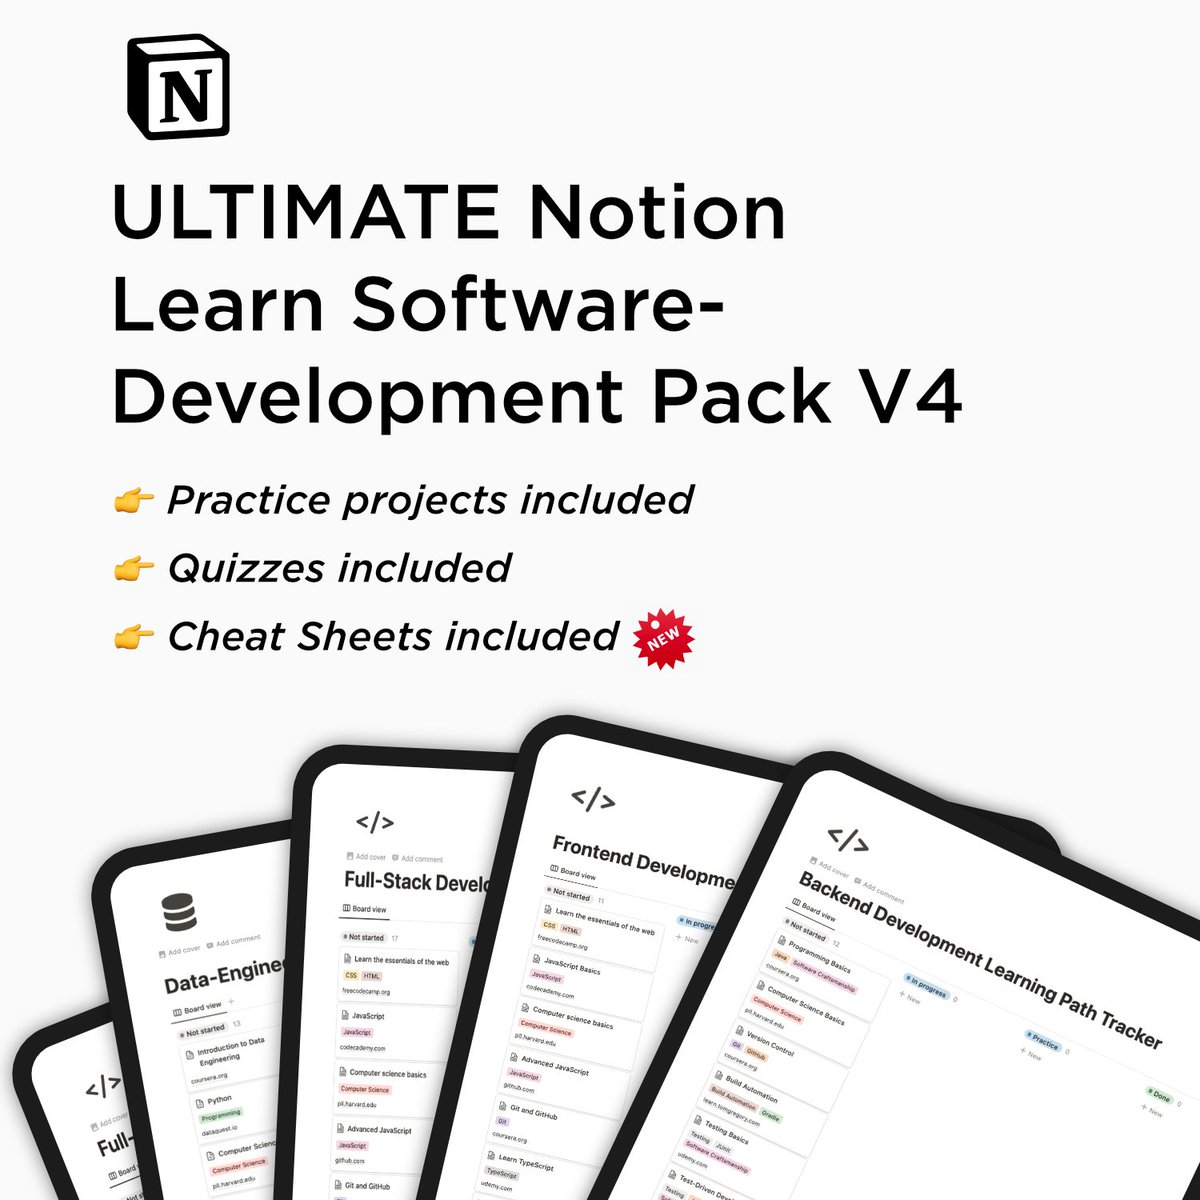 📚 Looking for a developer roadmap? Here are 5 FREE Notion templates: 🎨 Frontend ⚙️ Backend 🖥️ Full-Stack 🔬Machine-Learning 🚄 Data-Eng 📦 83 resources, 40 tasks, 40 Cheat Sheets and 500+ practice questions! RT and reply with 'free' and I'll DM it to you. (need to follow)